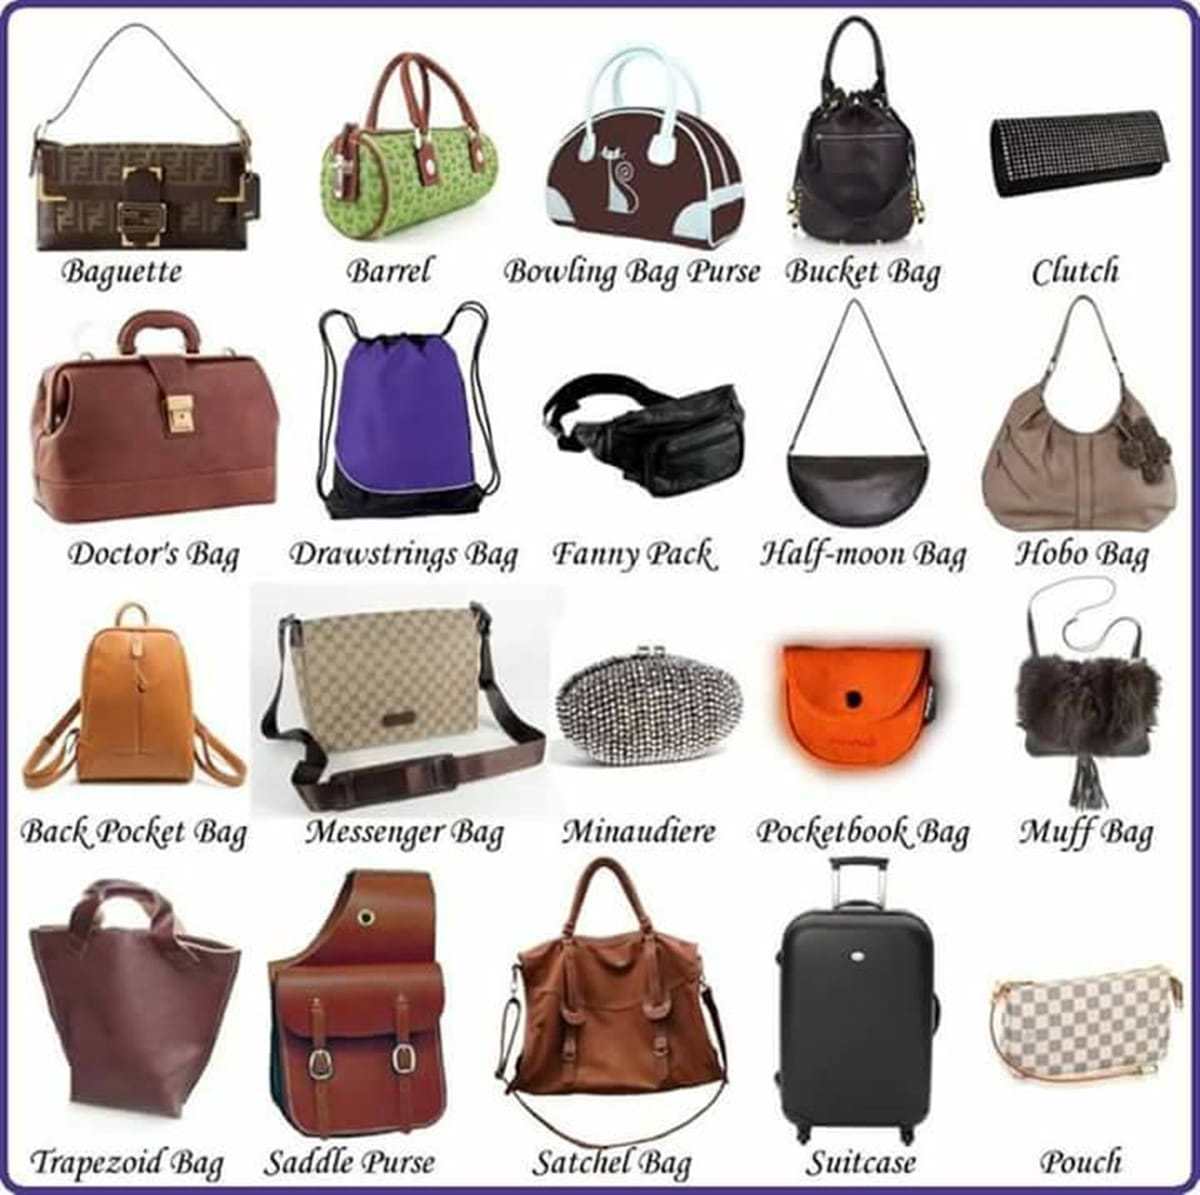 70 Different Types Of Bags - Key Features & Benefits